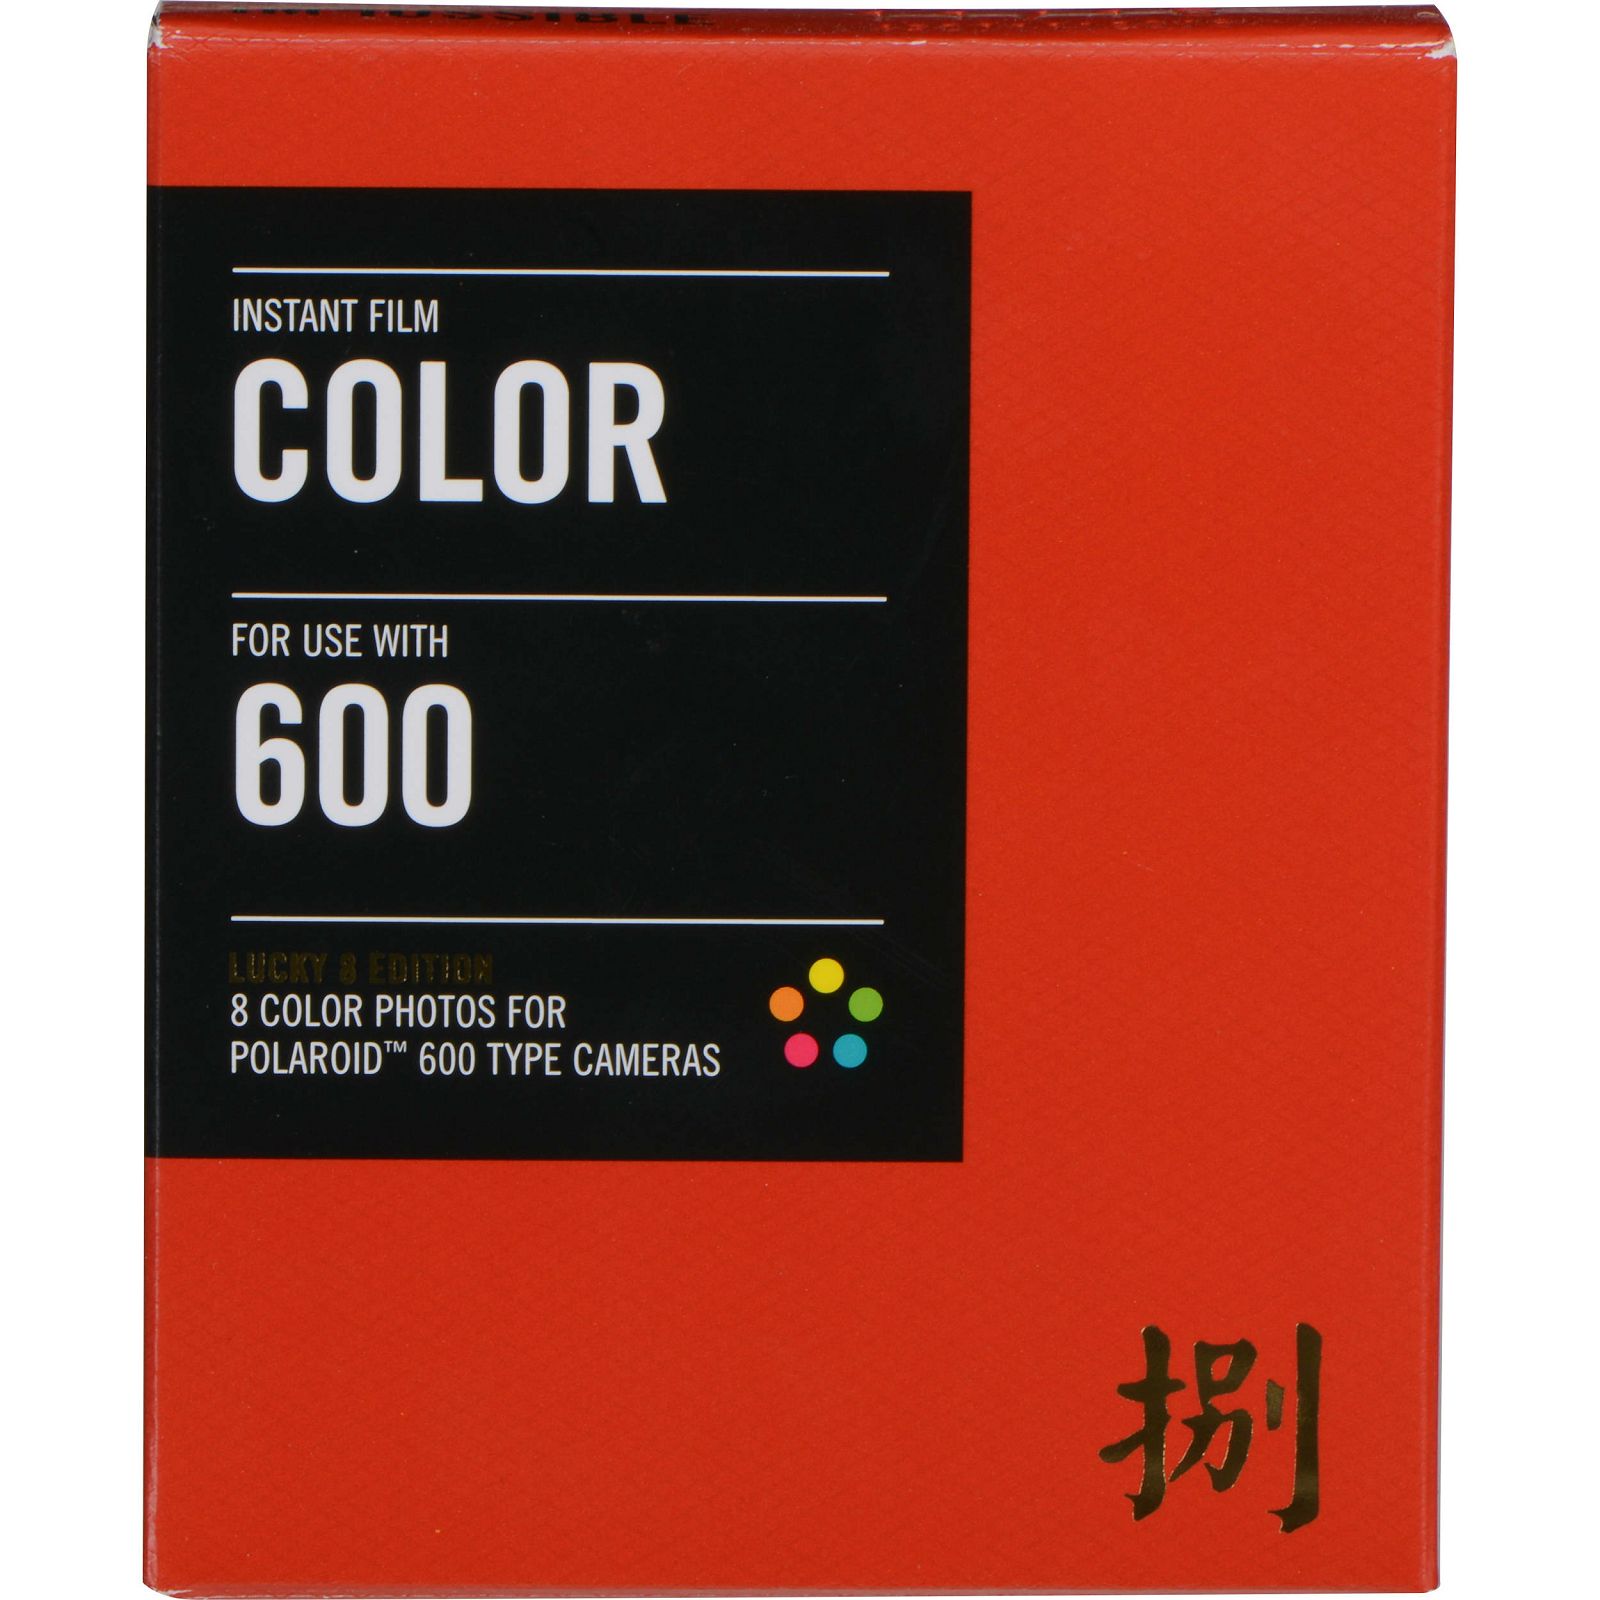 Impossible Color film za Polaroid 600 (Lucky 8 Edition, 8 Exposures) Film for Type 600 Polaroid Cameras